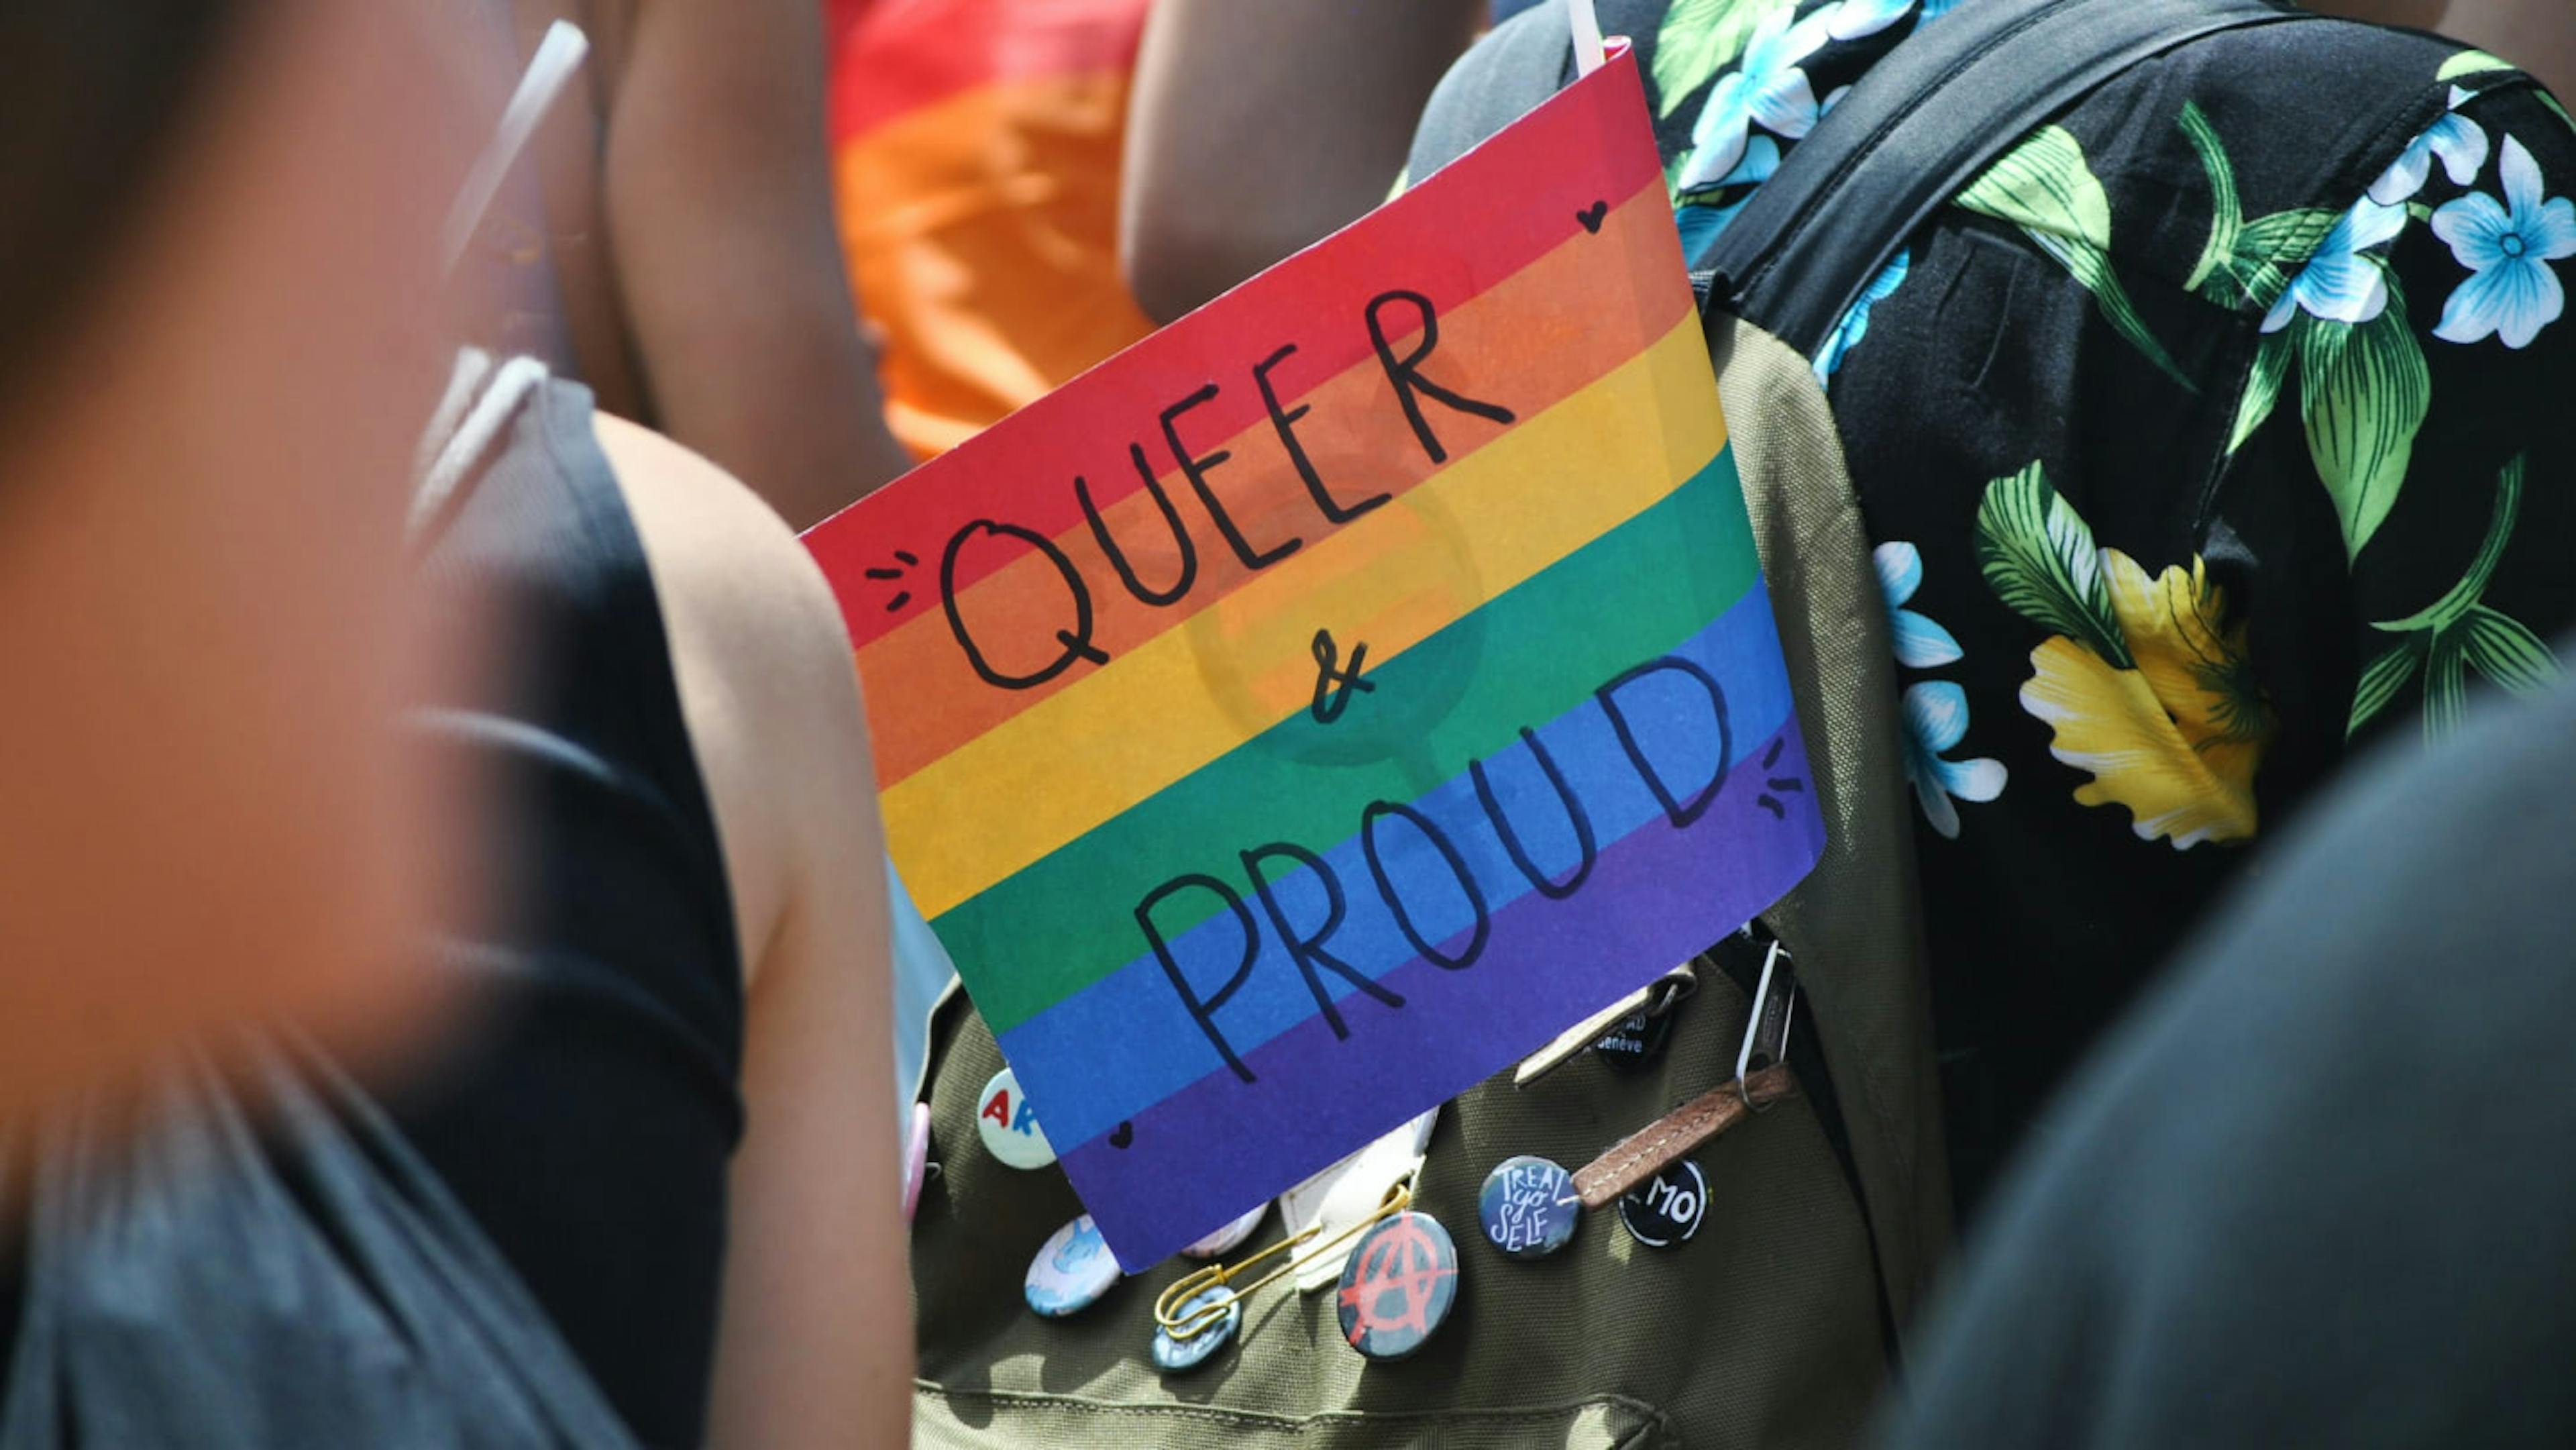 The word 'queer' used to be a slur, but has been reclaimed by the LGBTQ+ community in recent years.